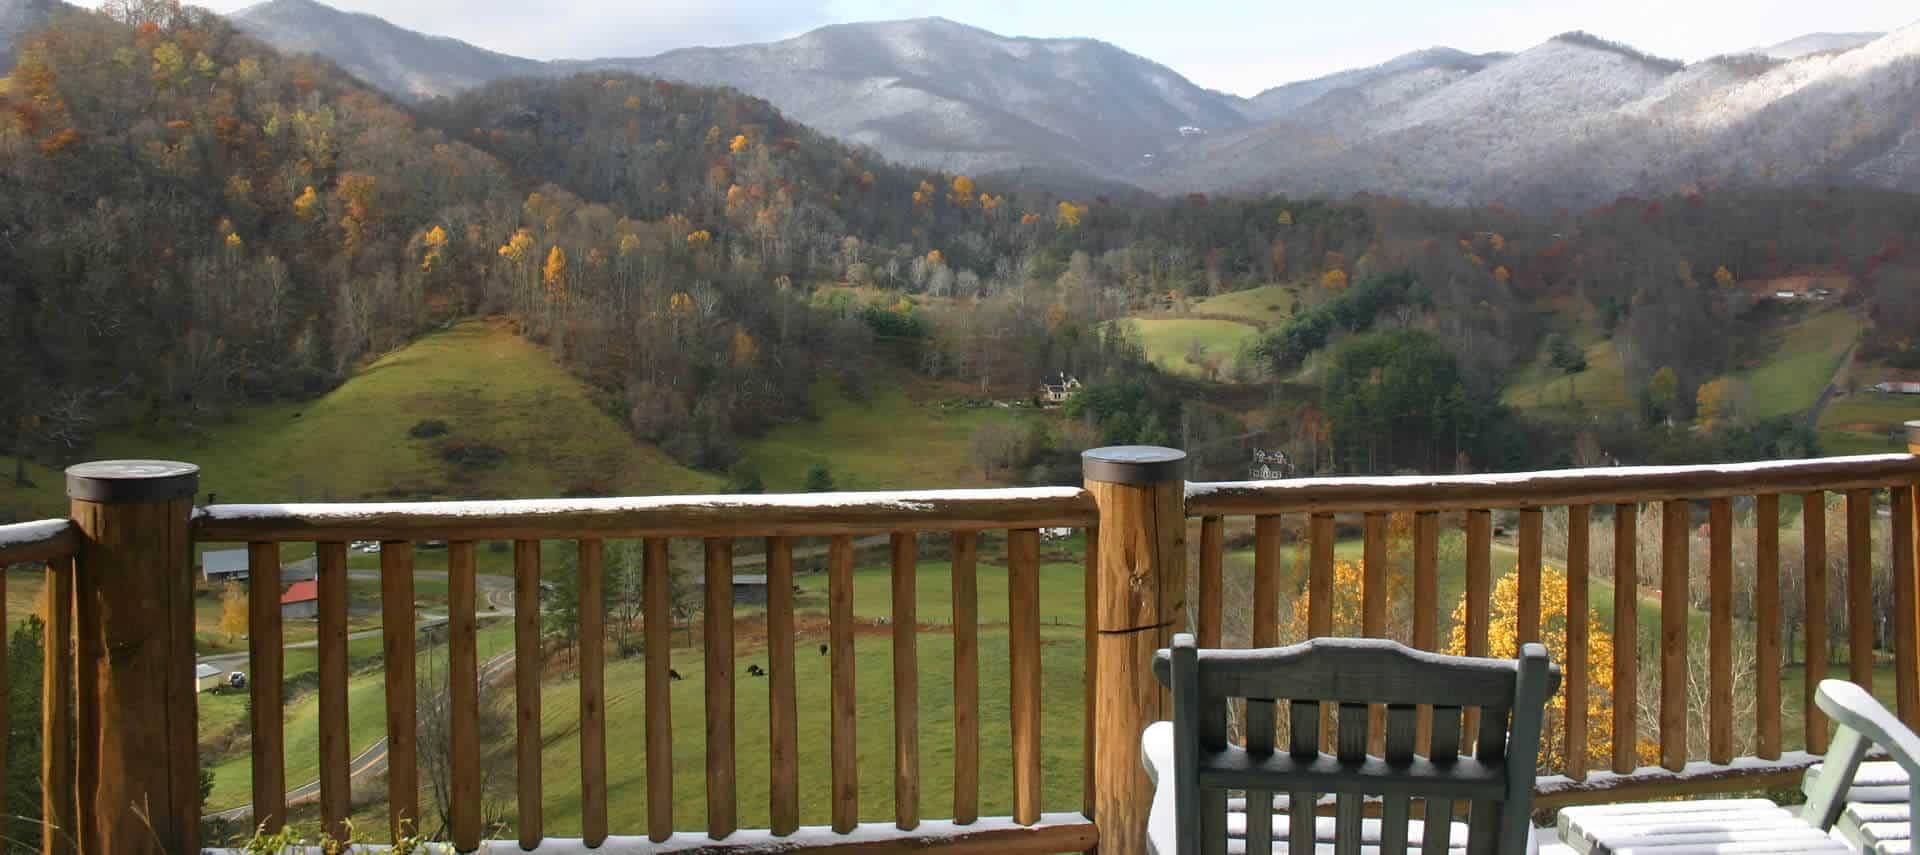 View from wooden balcony of fields and hills and further mountains. 